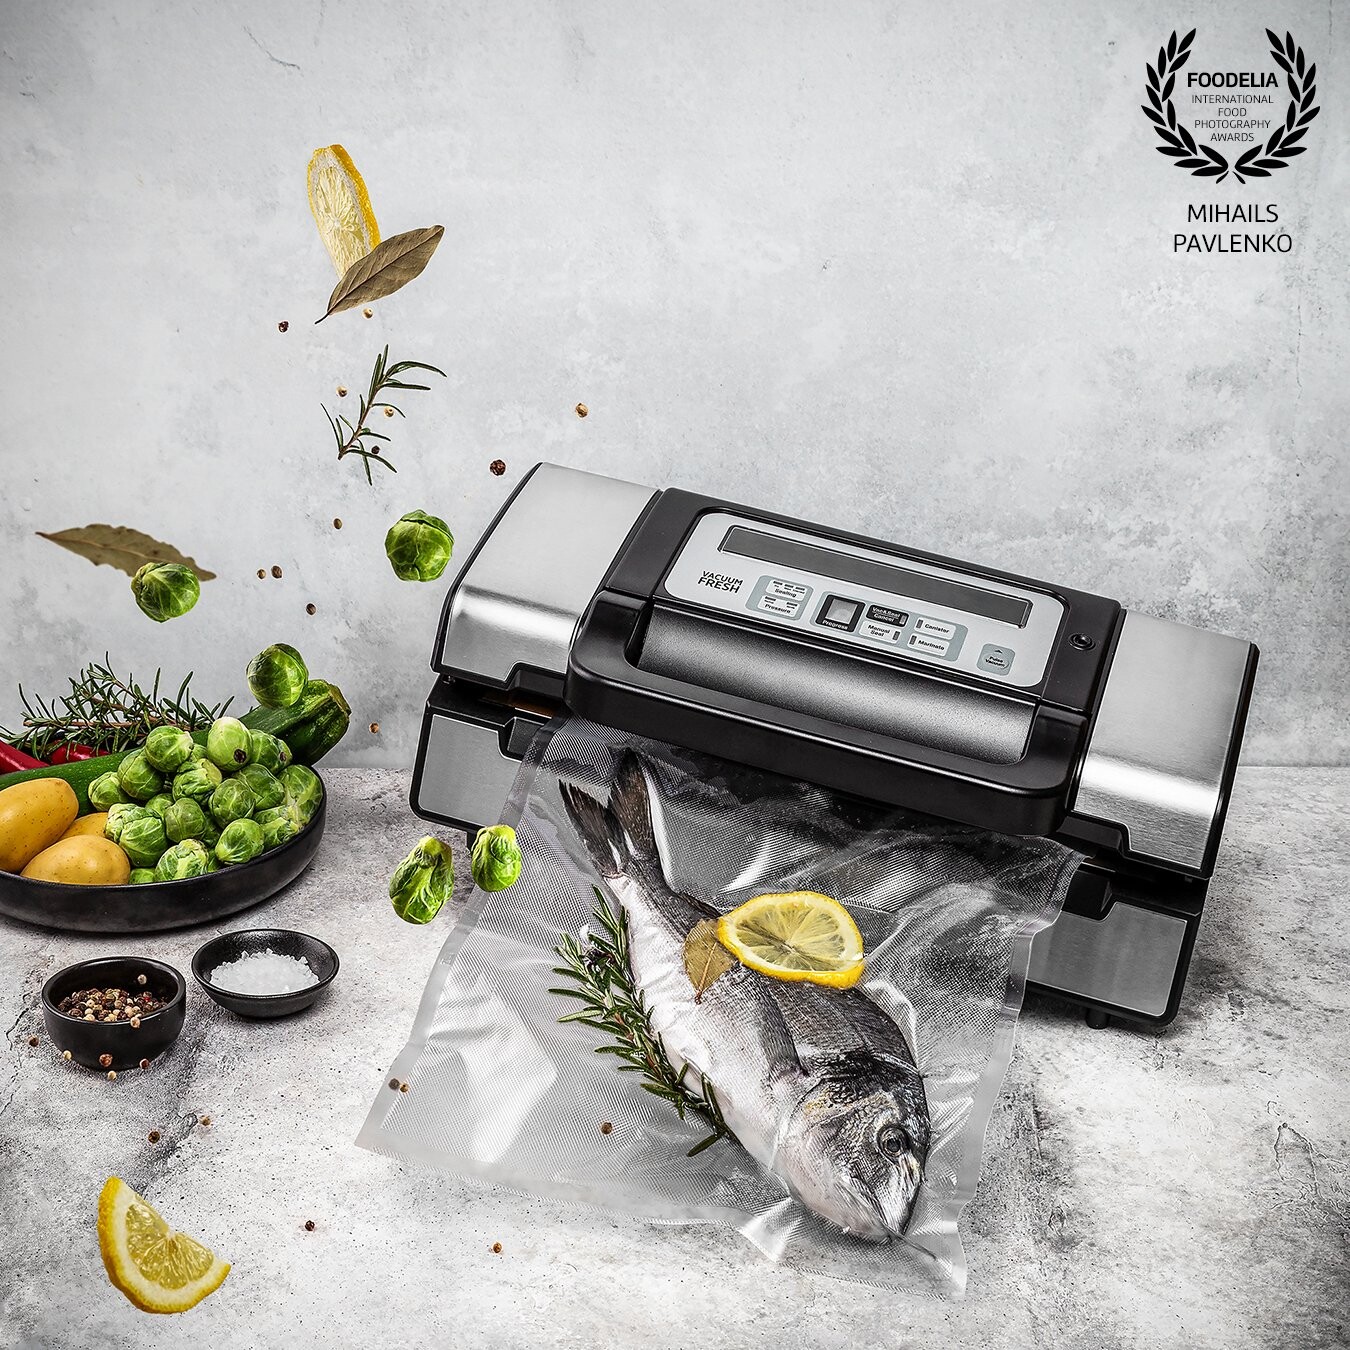 In perfect Stollar vacuum sealer product you can use almost everything, it will be perfectly vacuumed. Photo shoot of @stollar_is_now_sage vacuum sealer product.